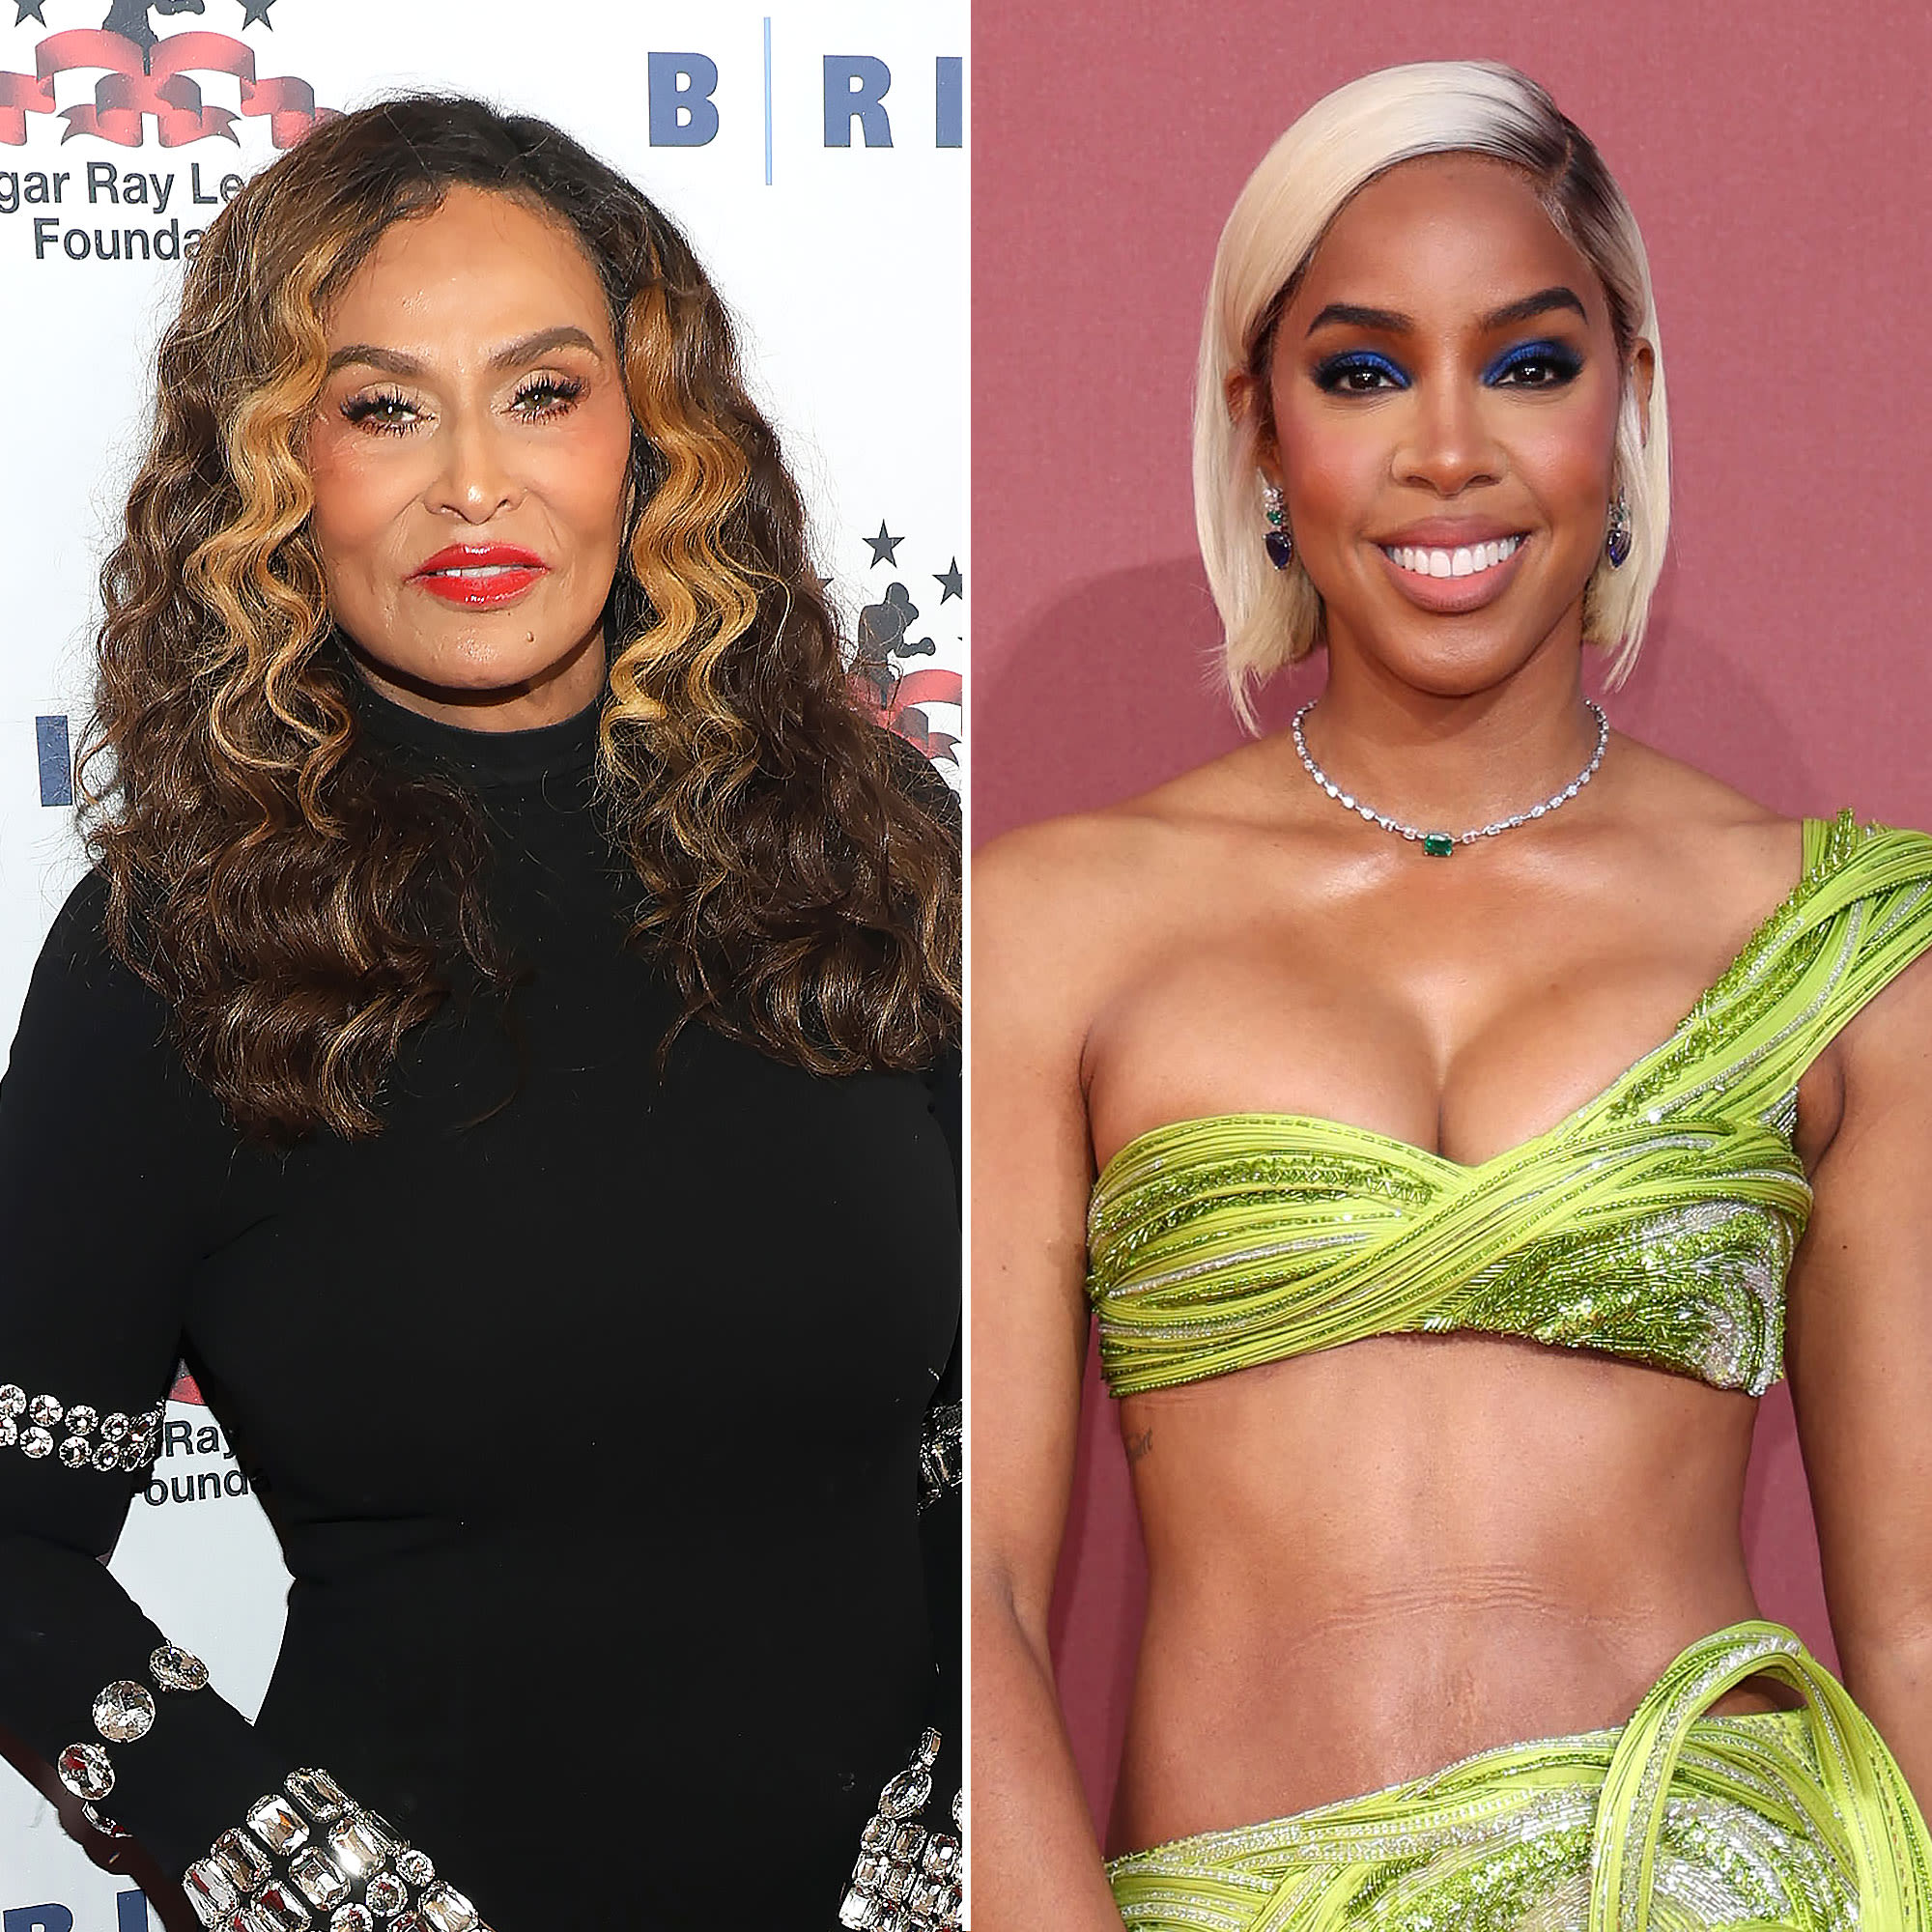 Beyonce’s Mother Tina Praises Kelly Rowland’s ‘Class and Grace’ After Cannes Incident